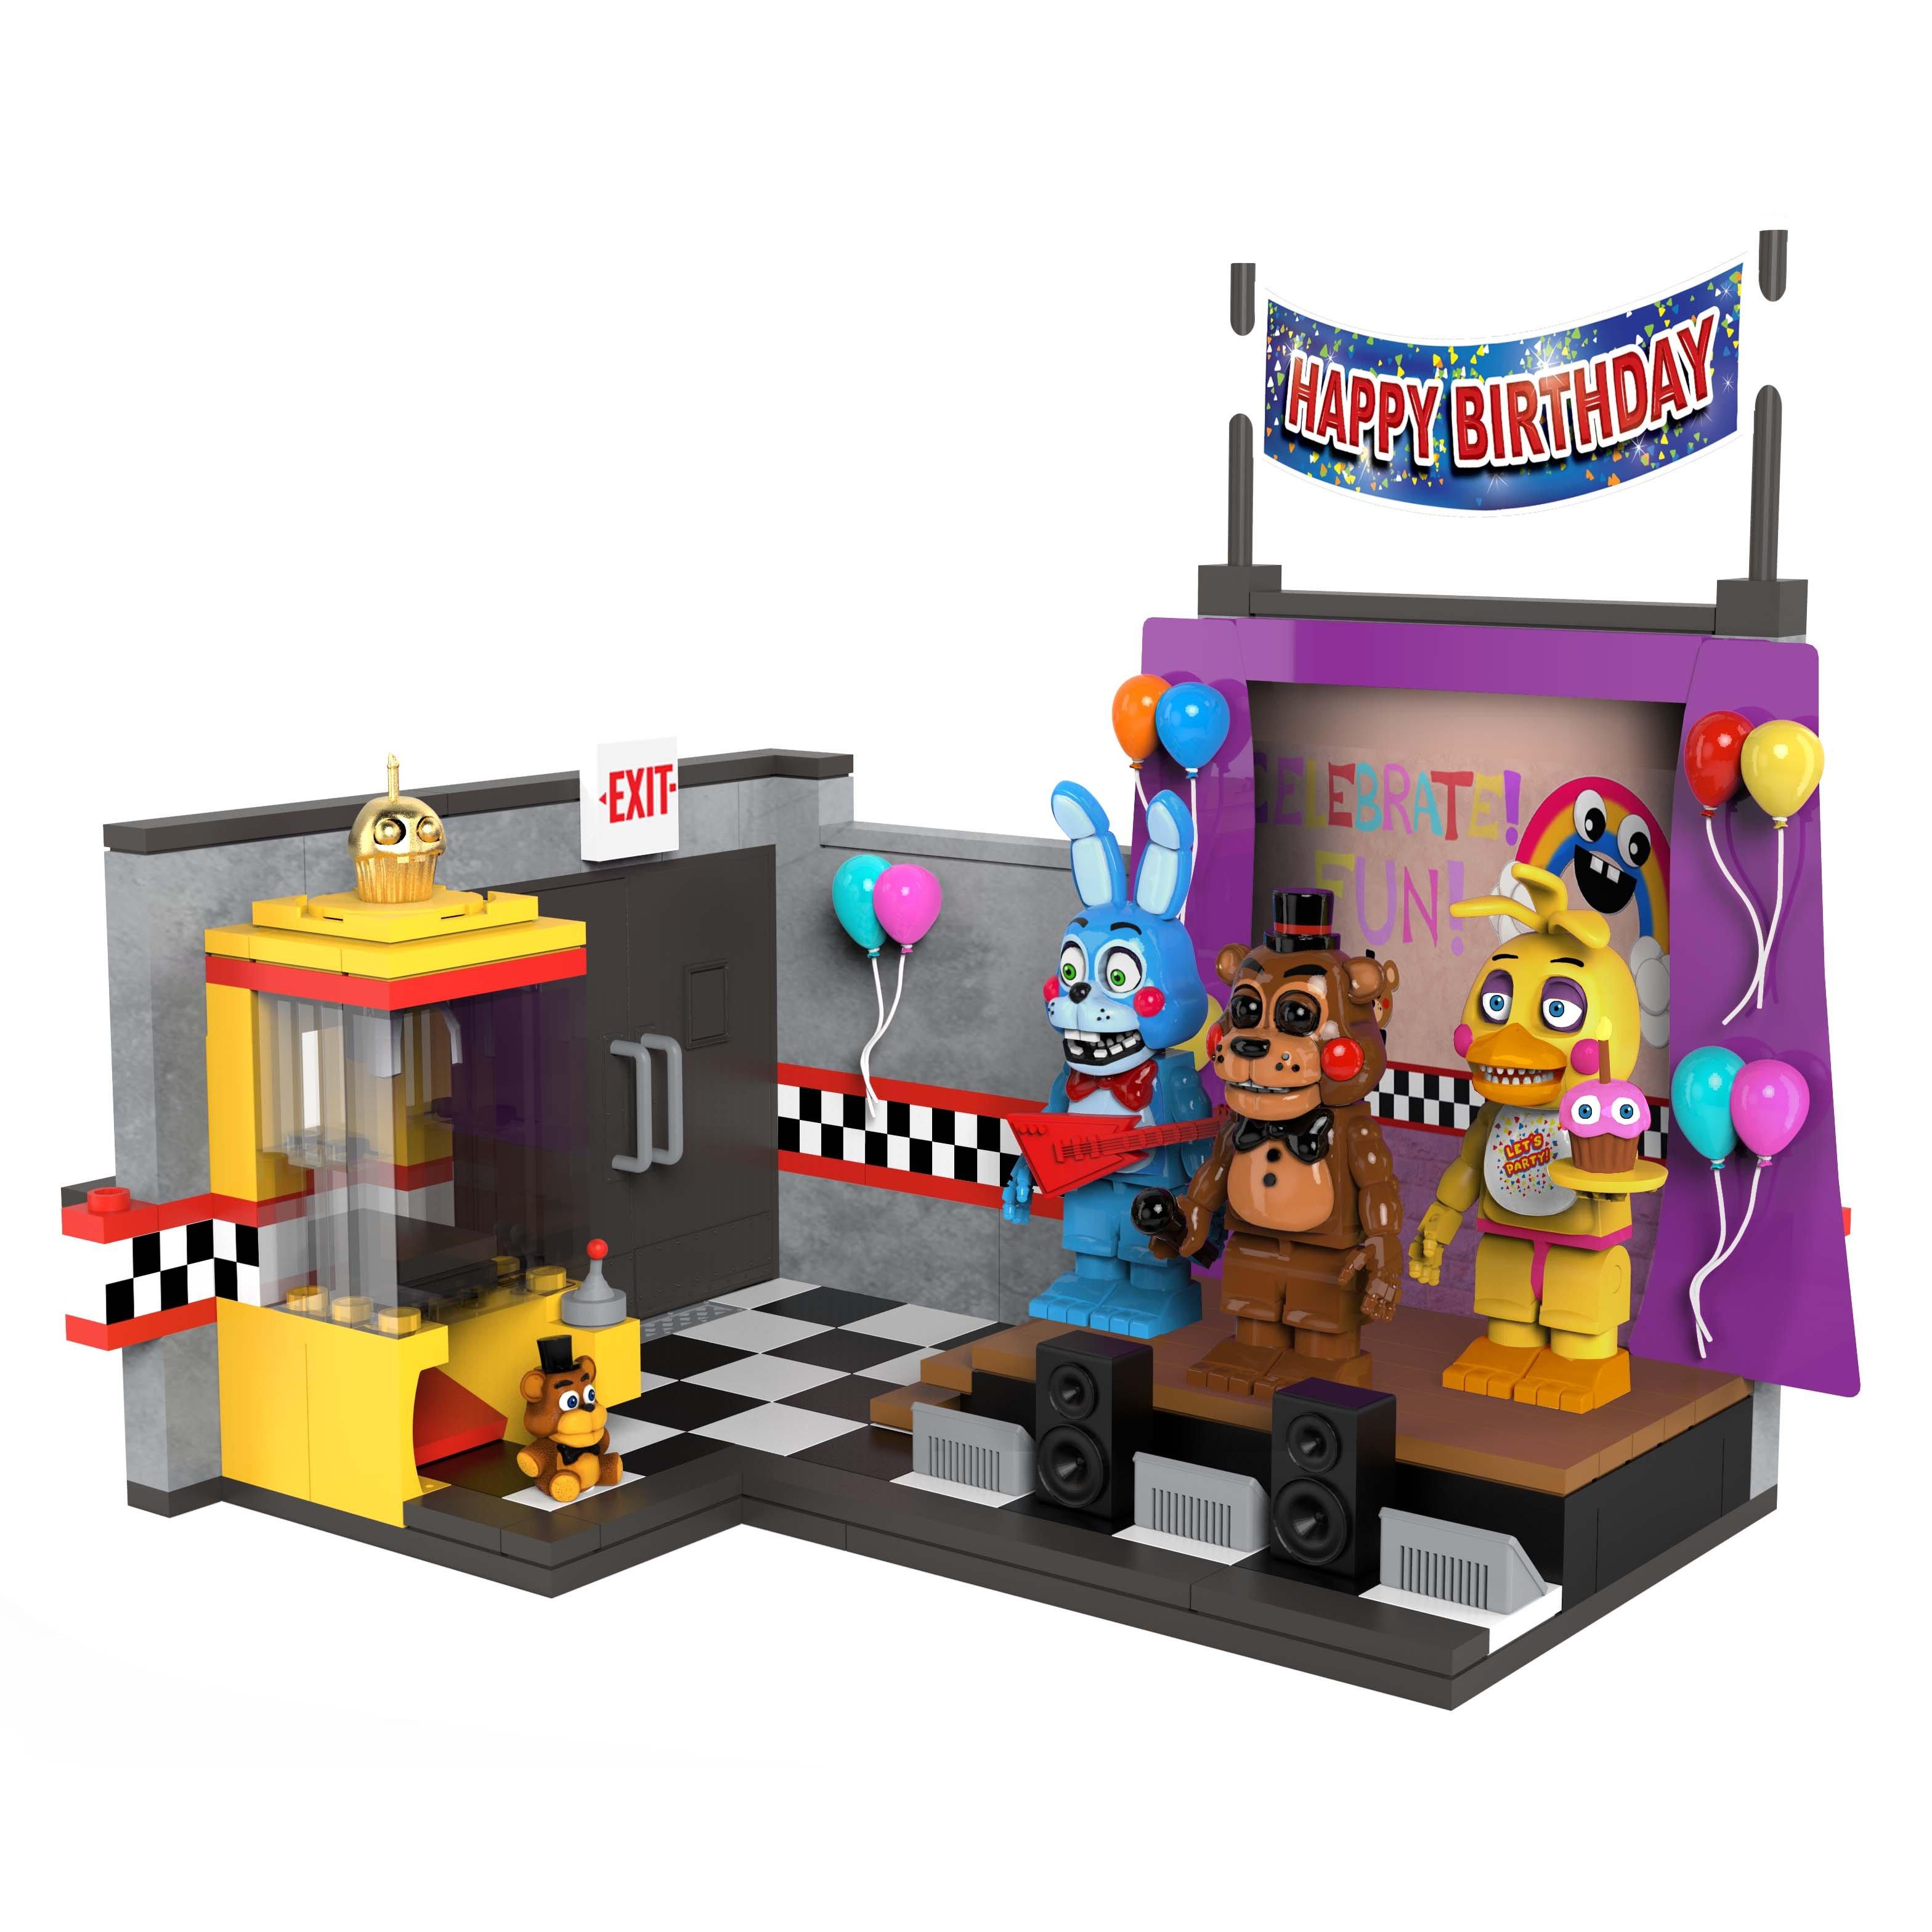 hey google play five nights at freddy's